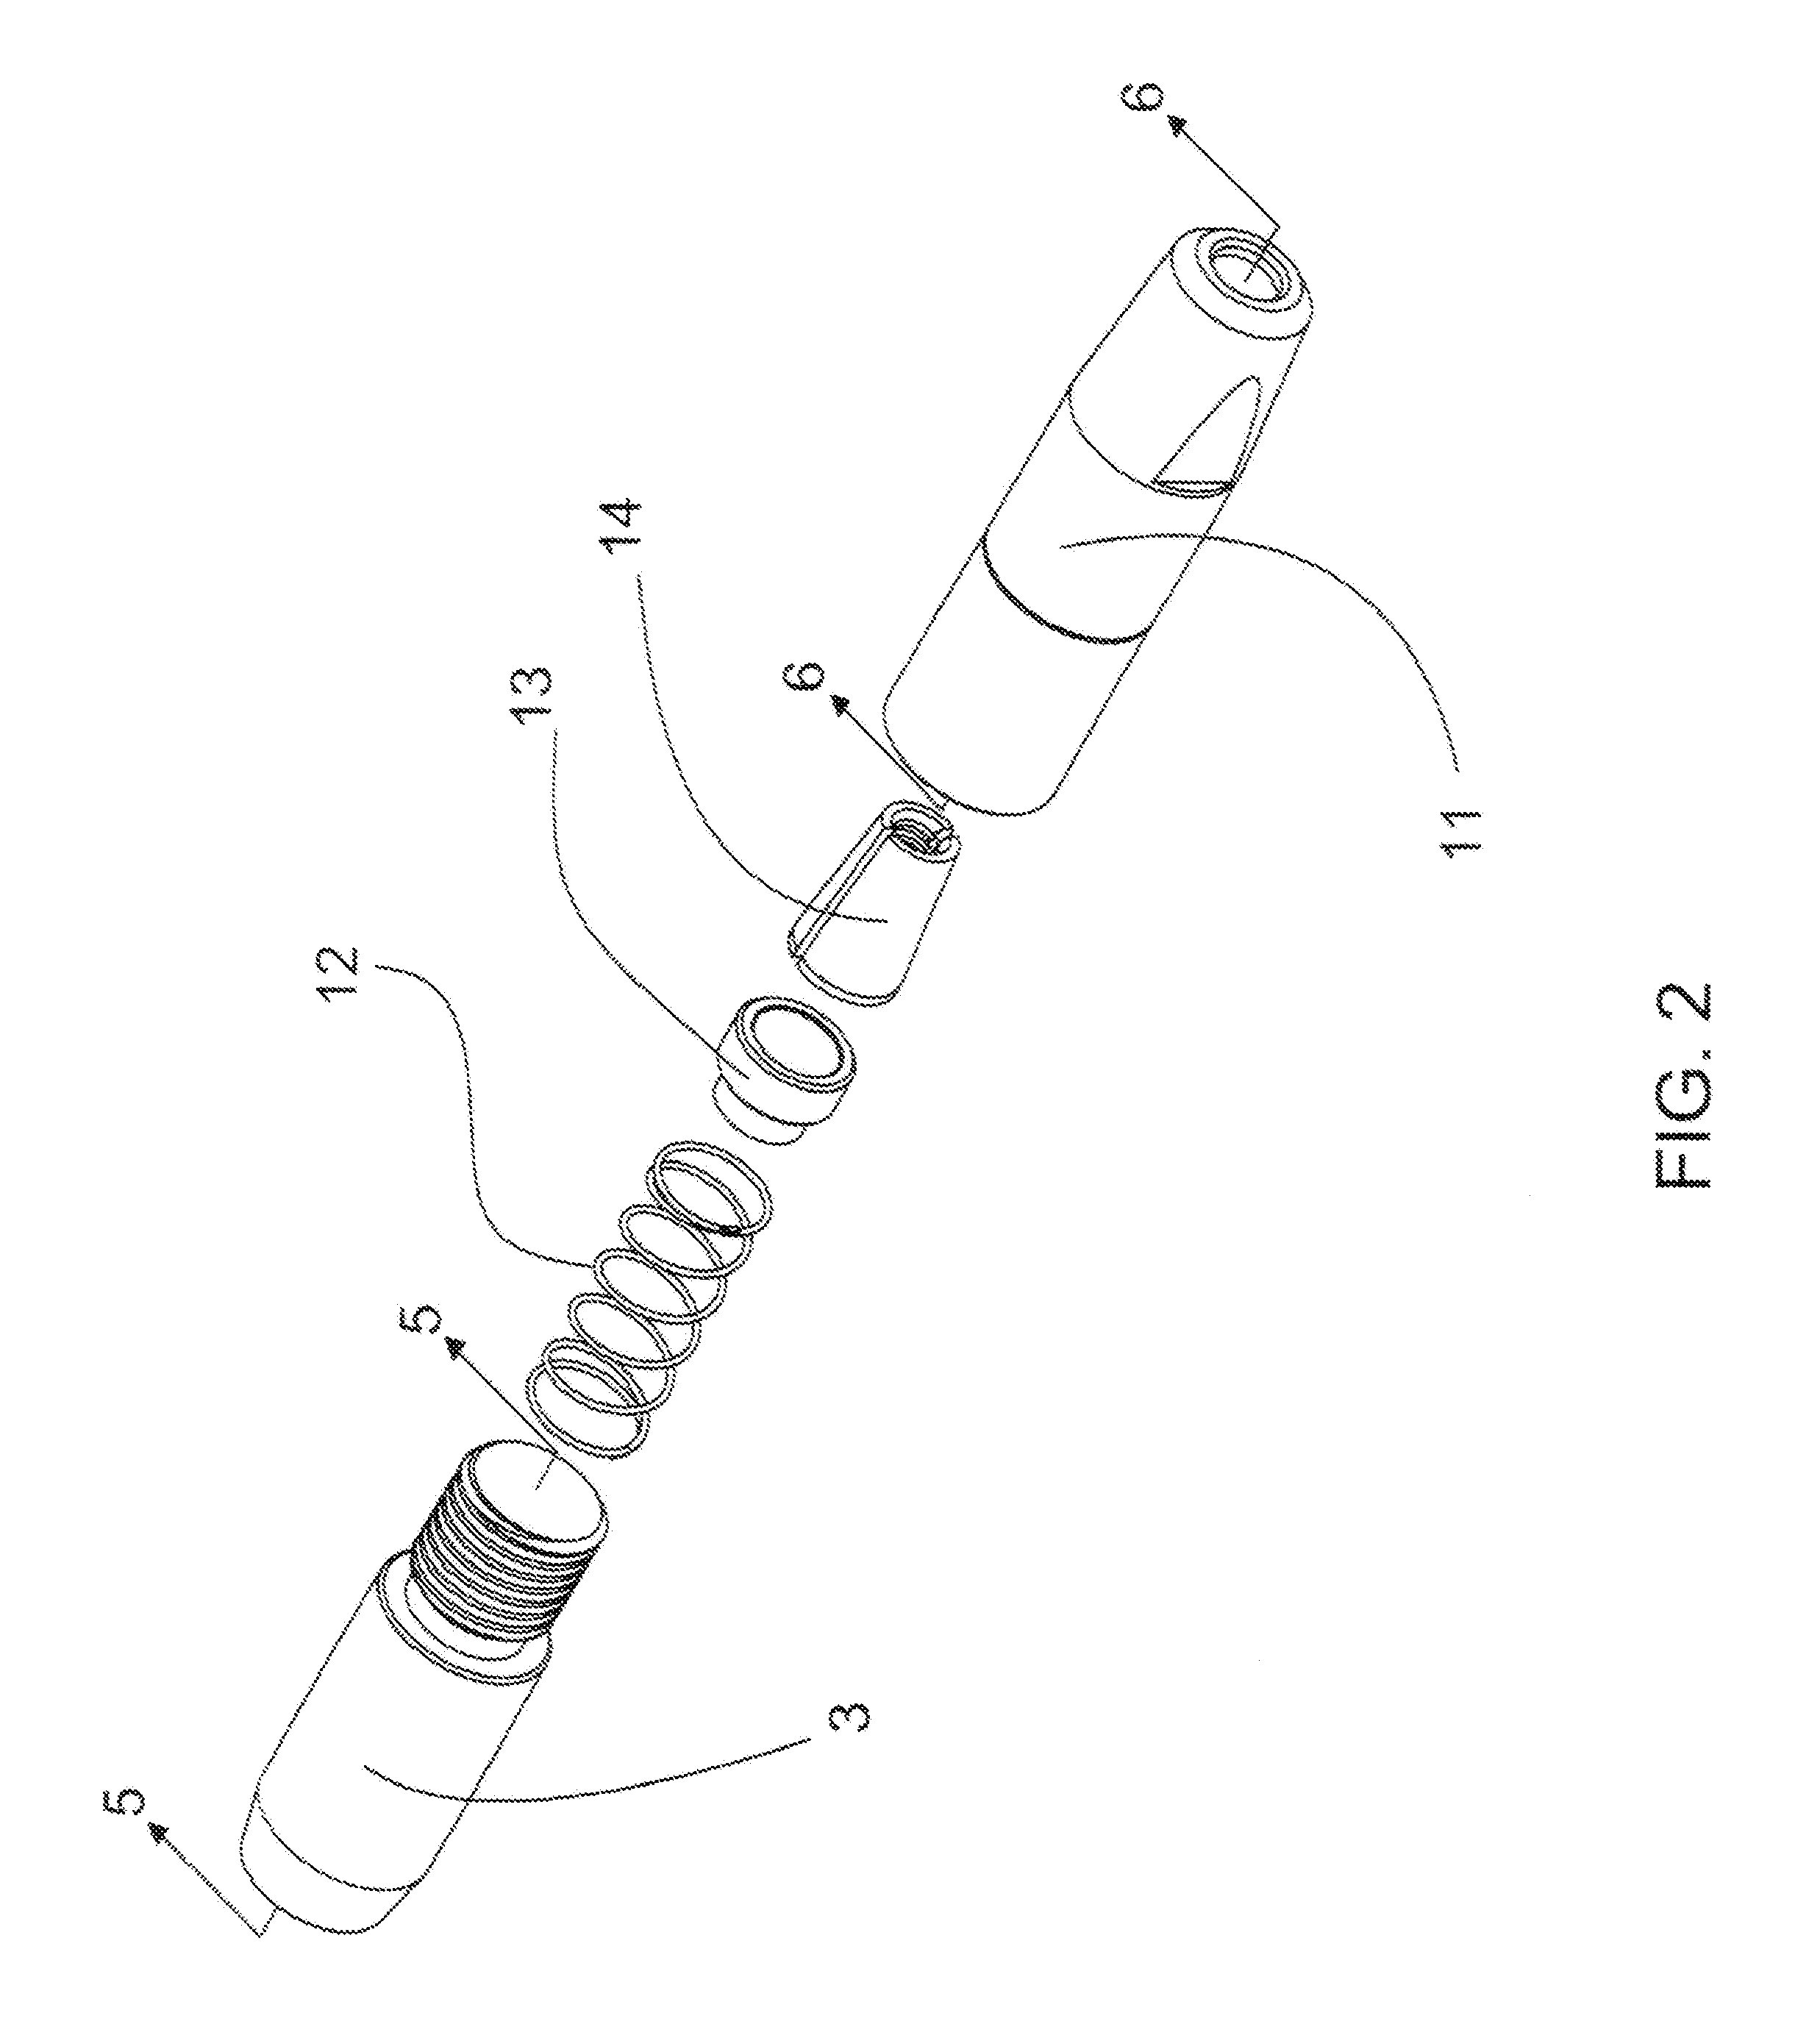 Interchangeable Self-Locking Spring Loaded Quick Connect Apparatus For Wire Rope Cable and The Like